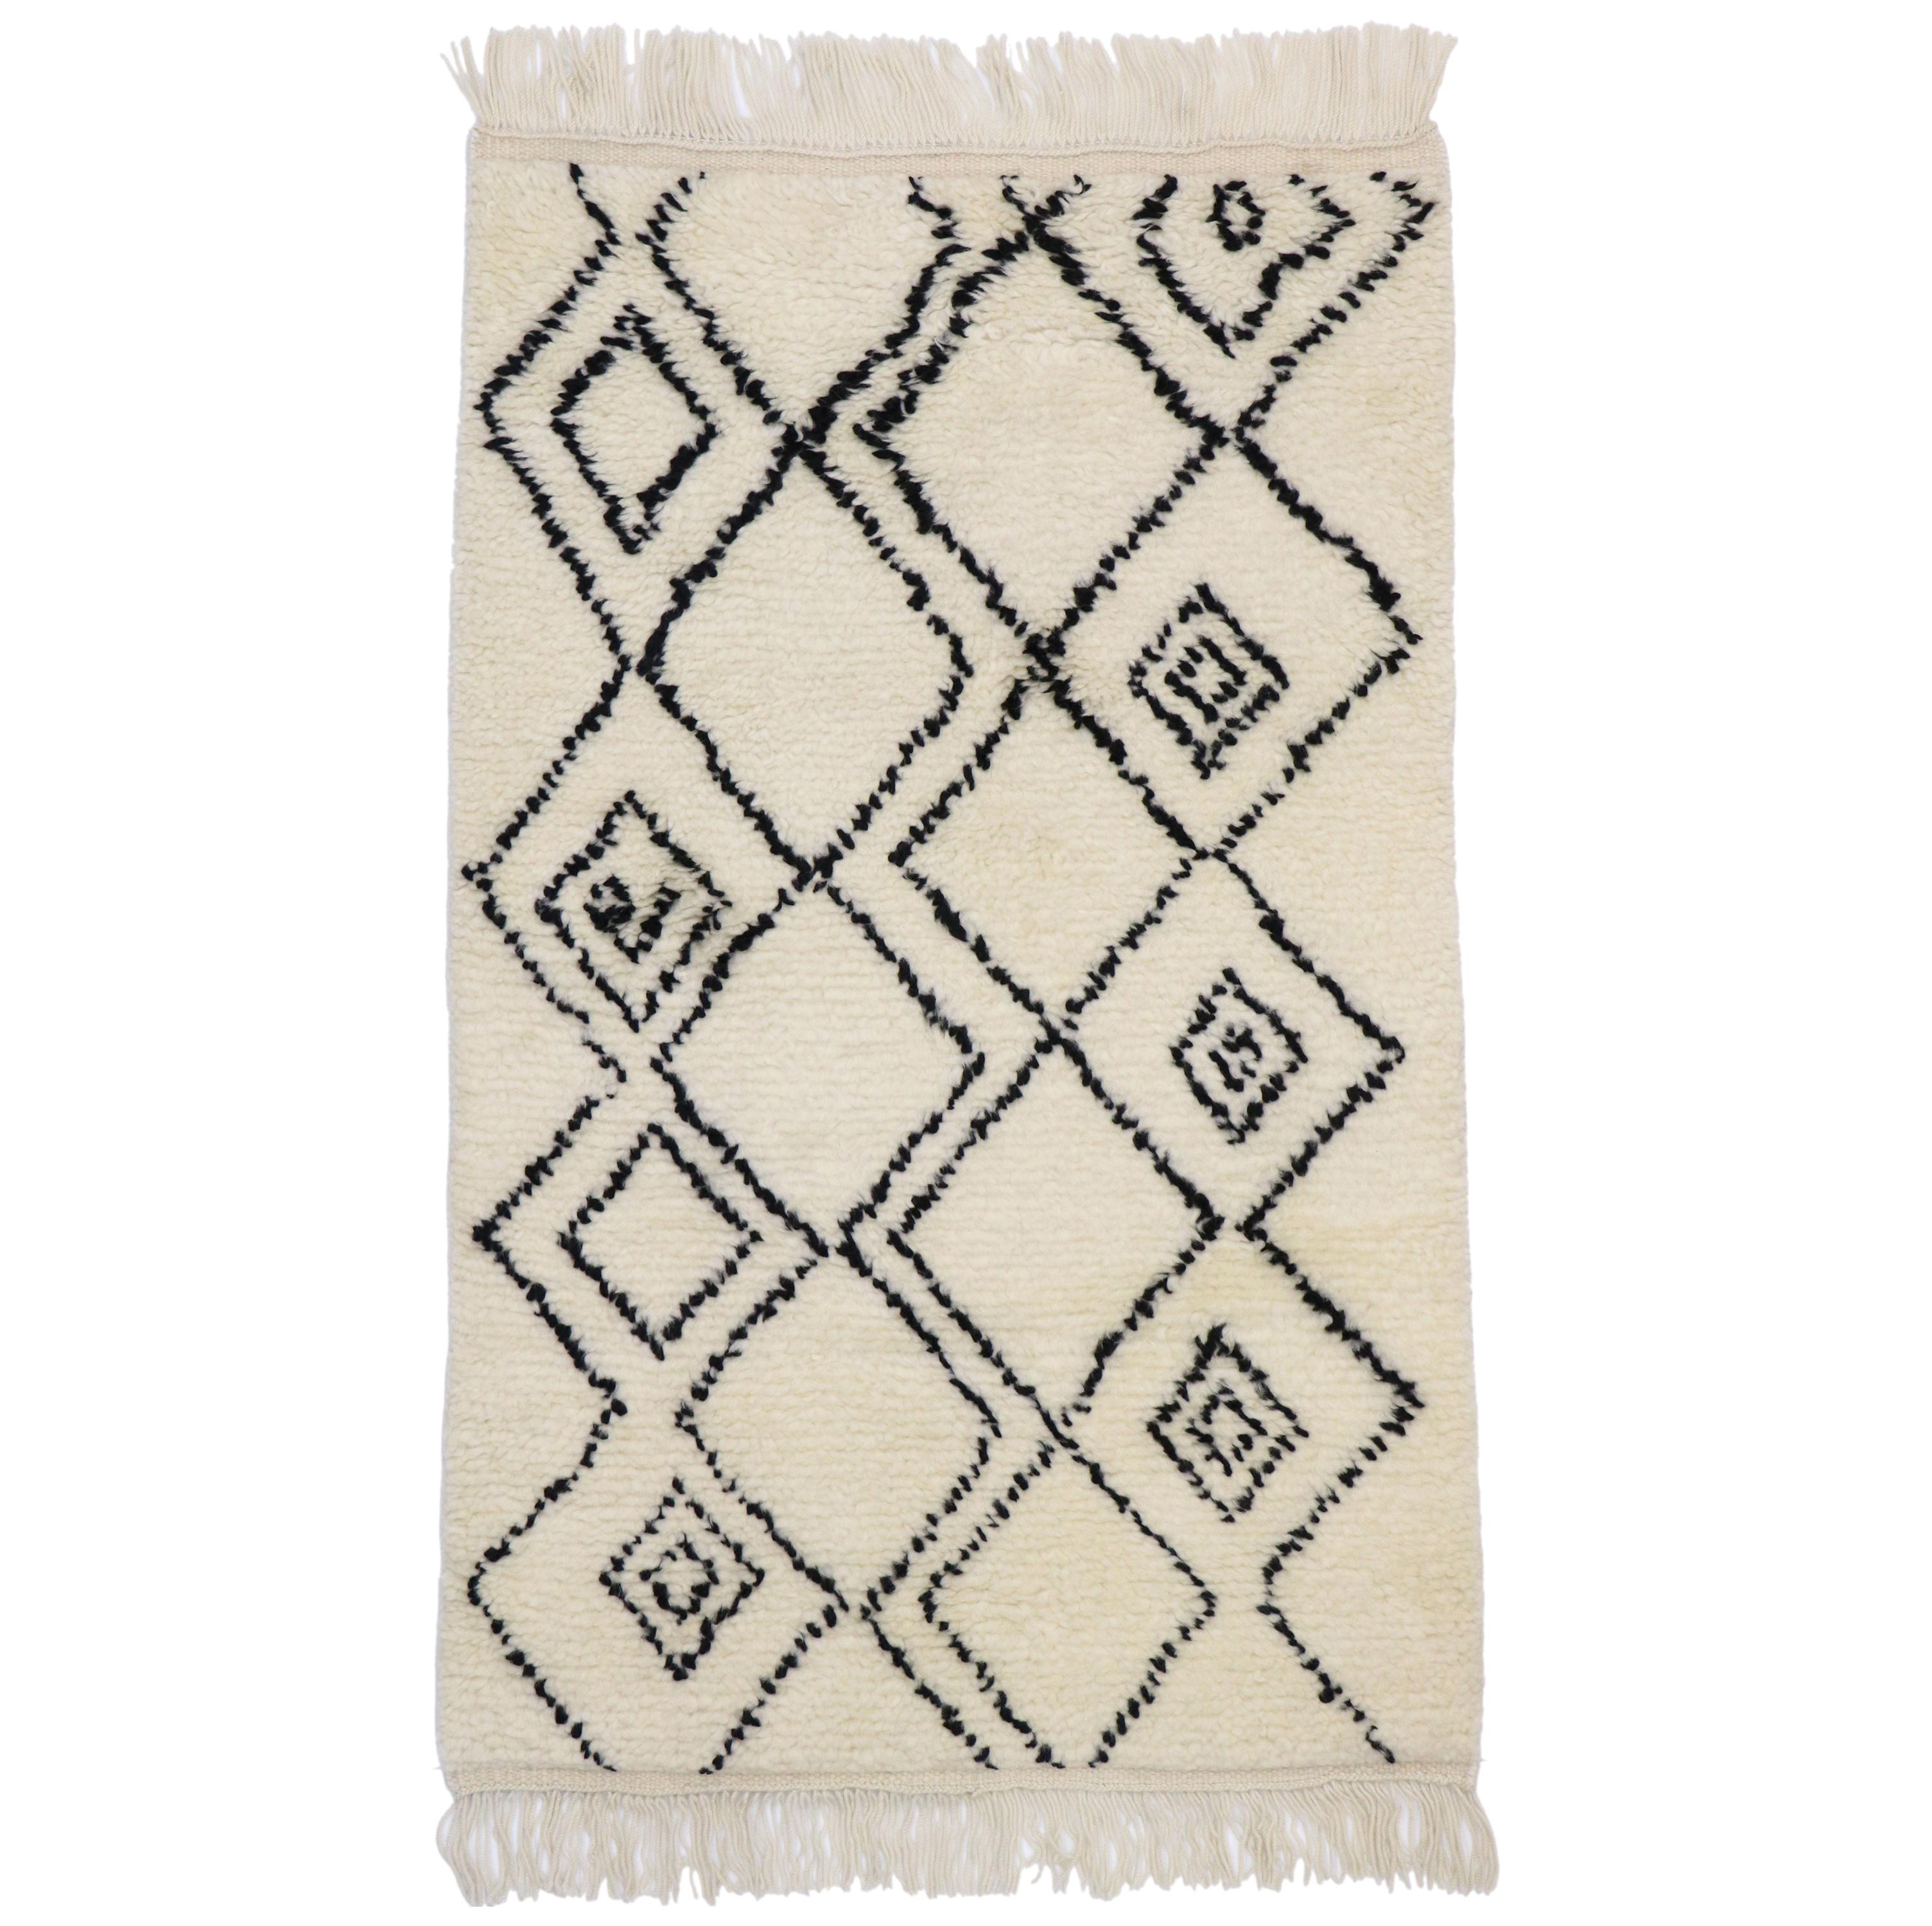 New Contemporary Moroccan Rug with Minimalist Tribal Vibes